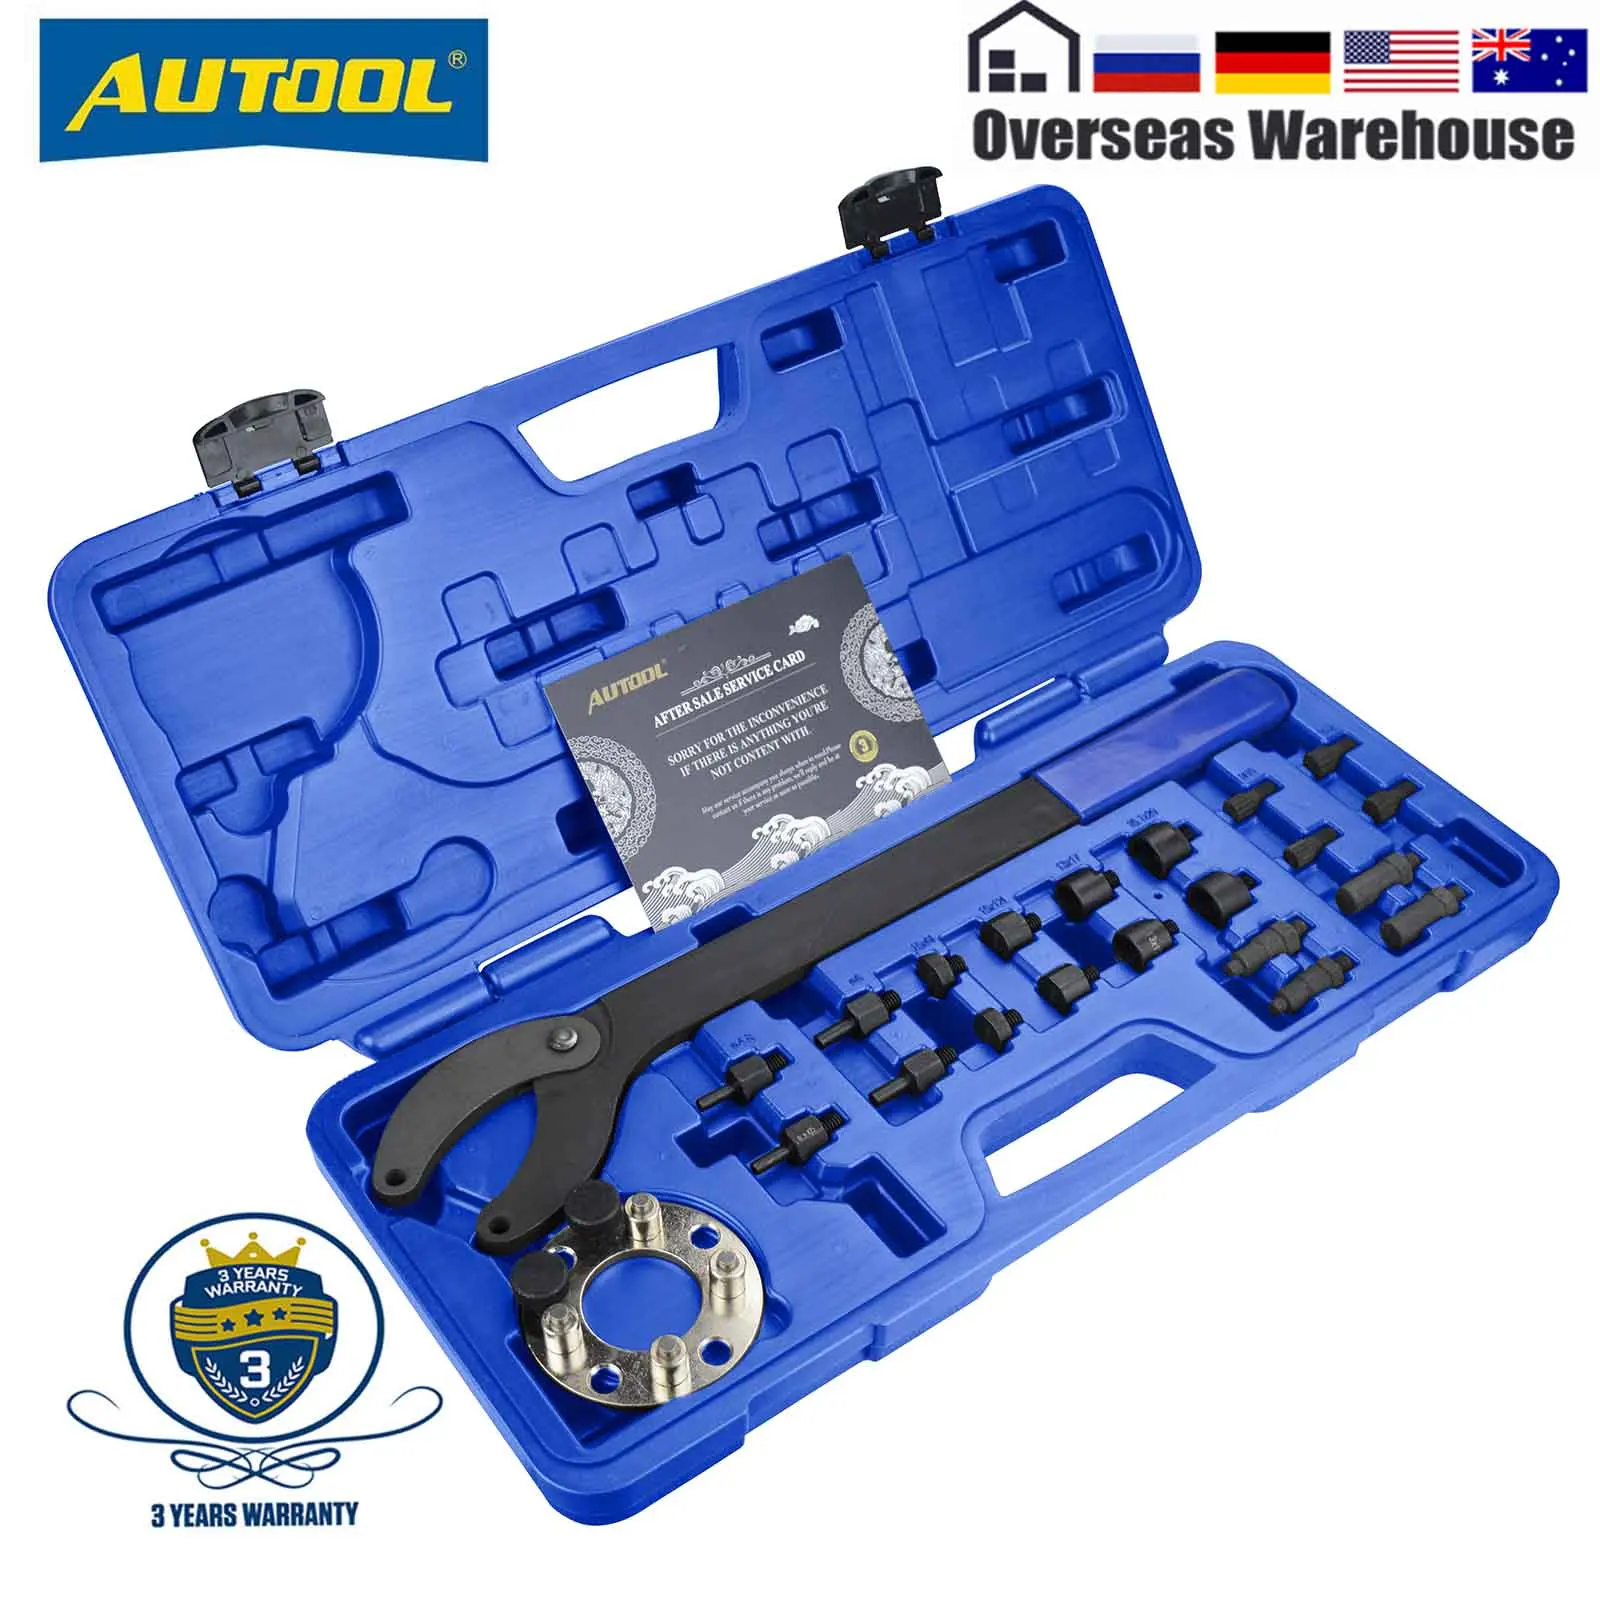 

AUTOOL Camshaft Pulley Holder Tool Set Camshaft Pulley Support Plate for VW Audi Skoda SEAT Equivalent to OEM T10172A T10554